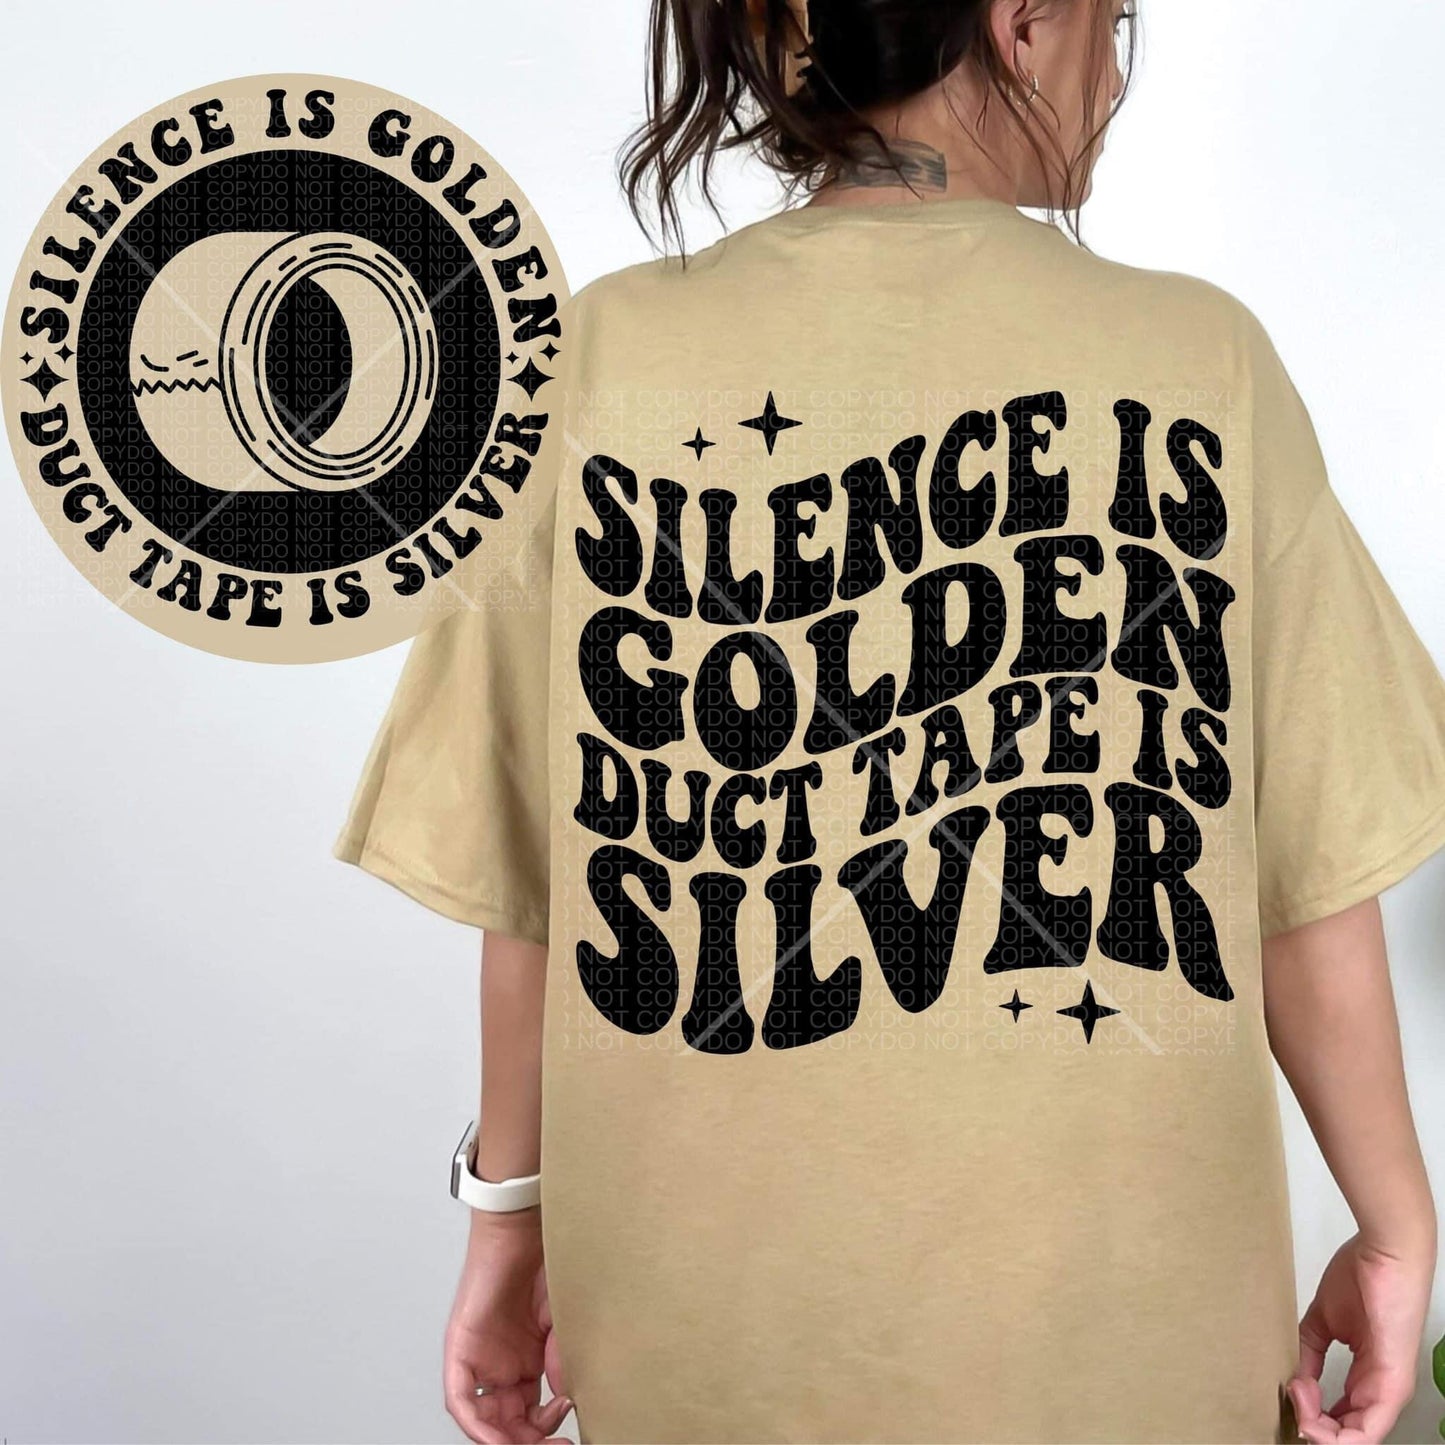 Silence is golden duck tape is silver- Front & Back *Ollie & Co. Exclusive*